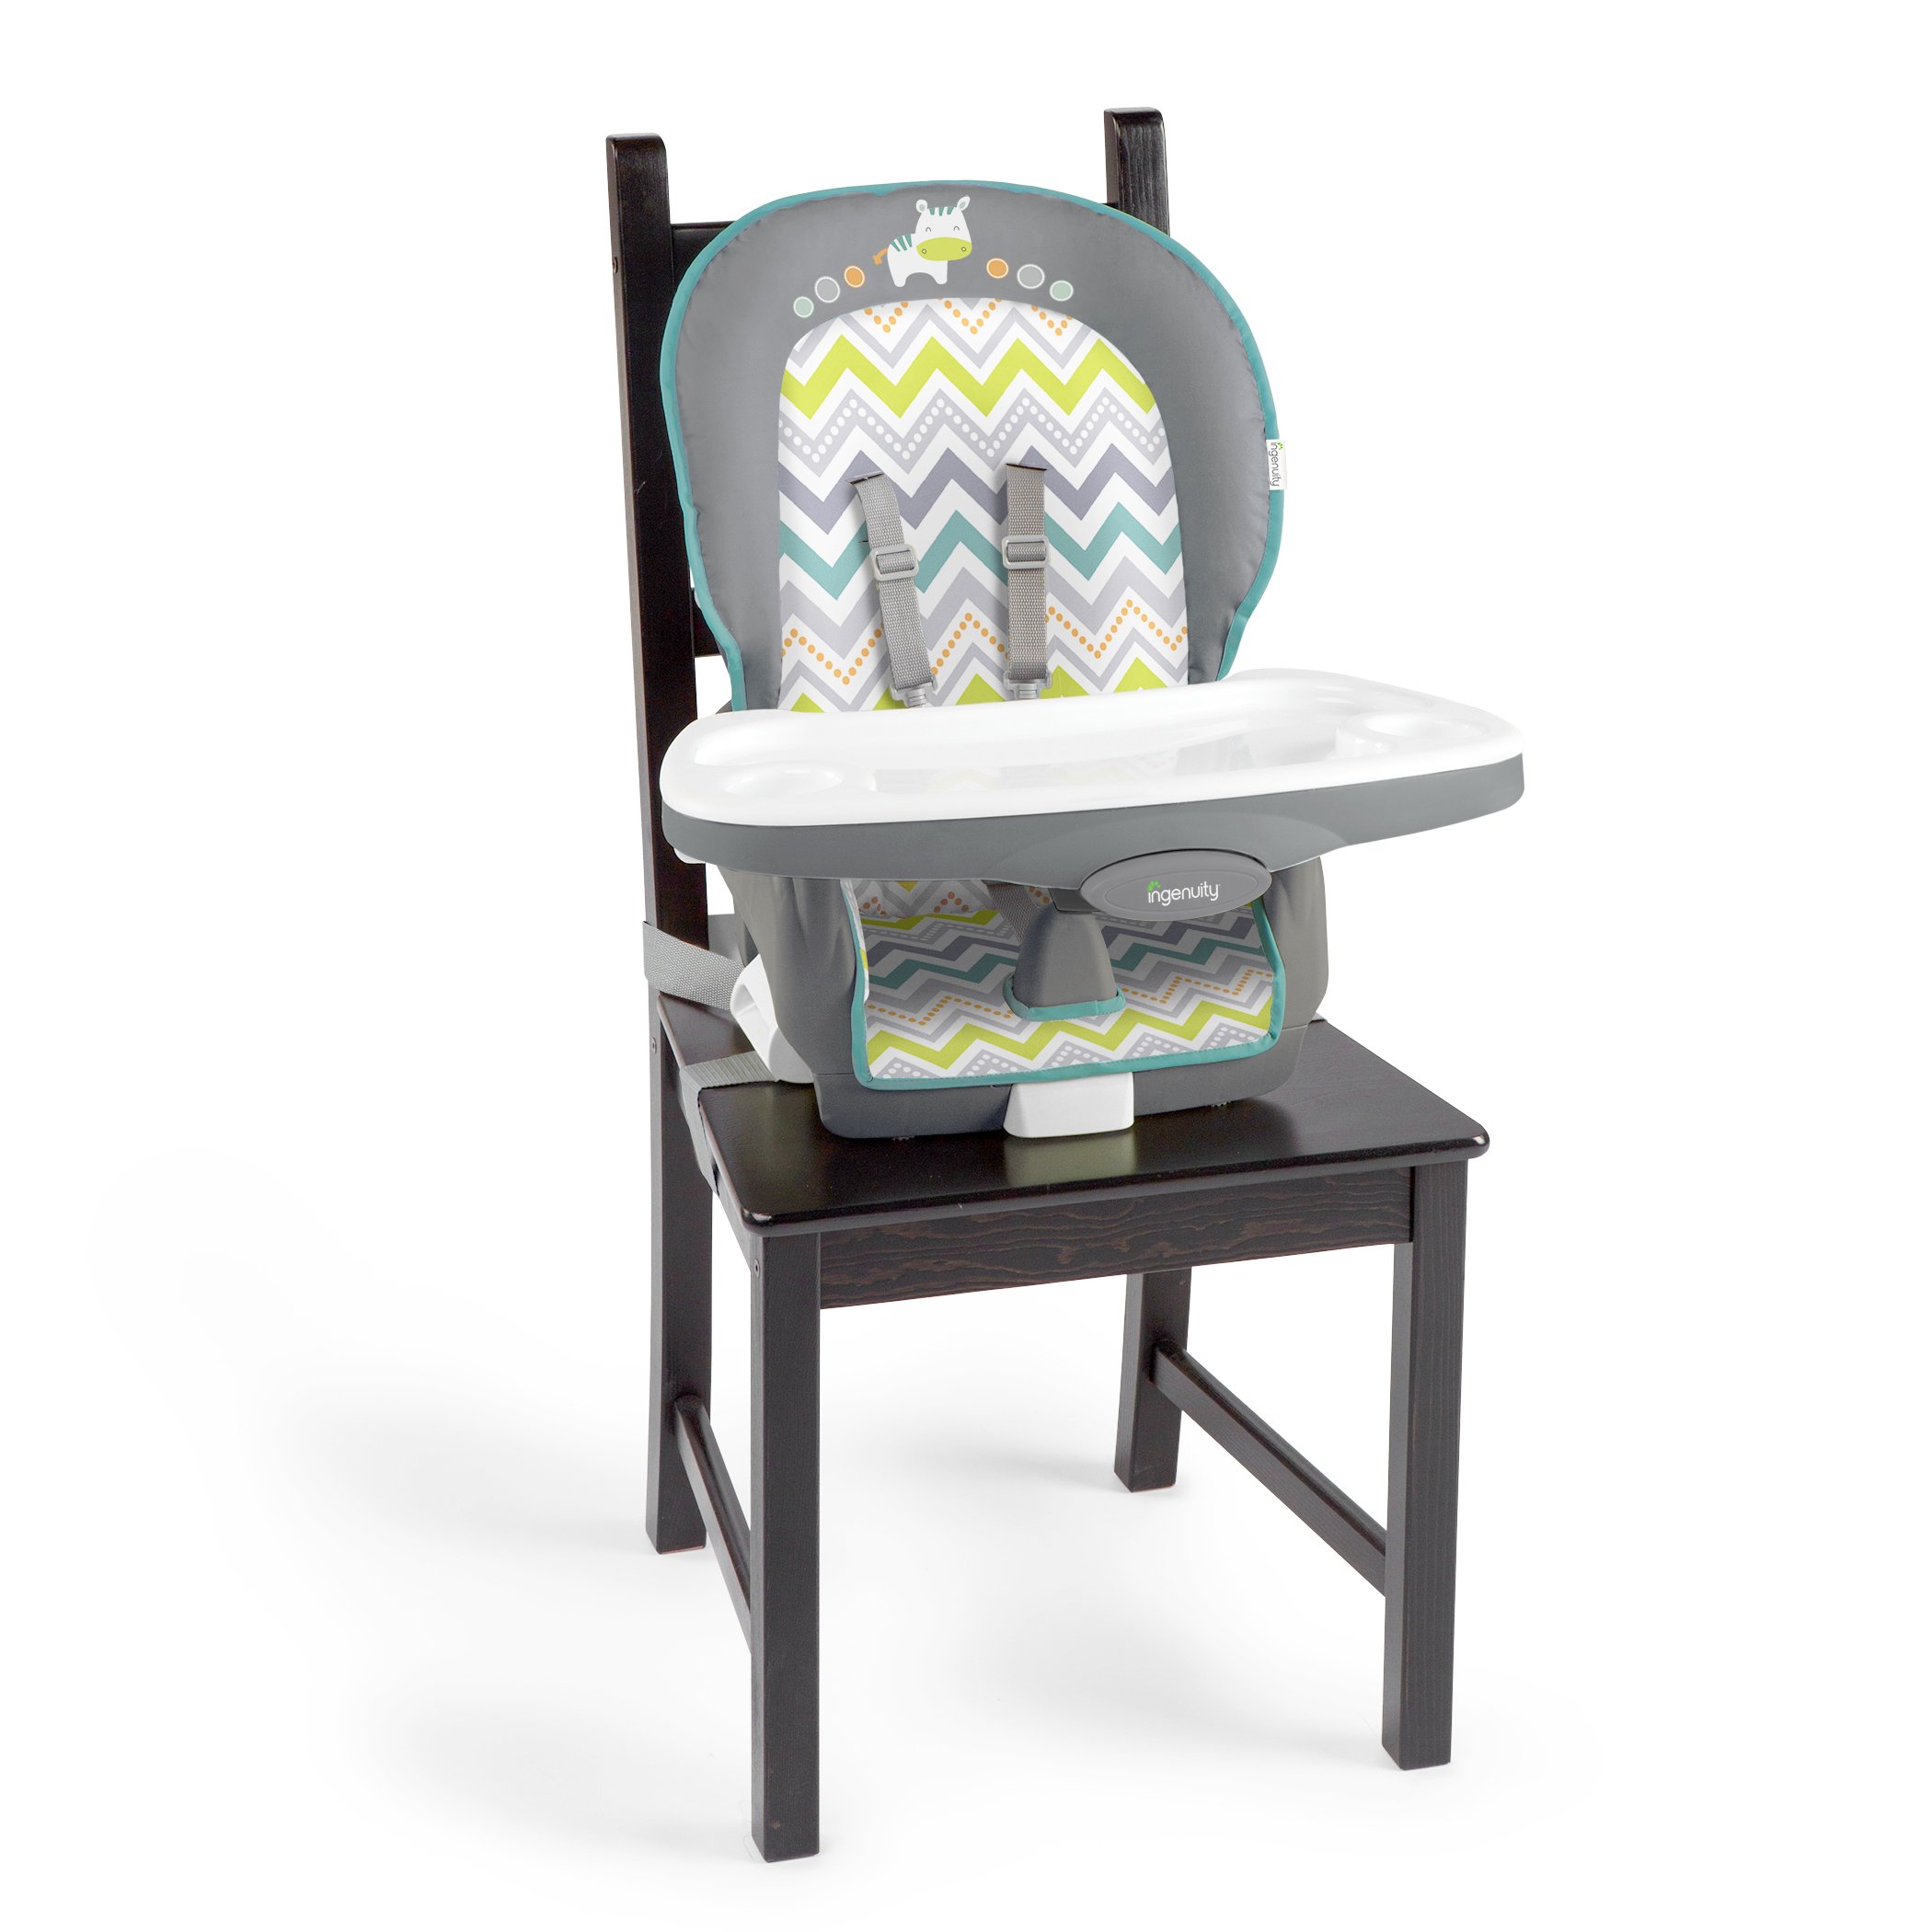 Ingenuity Trio 3-in-1 High Chair - Ridgedale - High Chair, Toddler Chair, and Booster